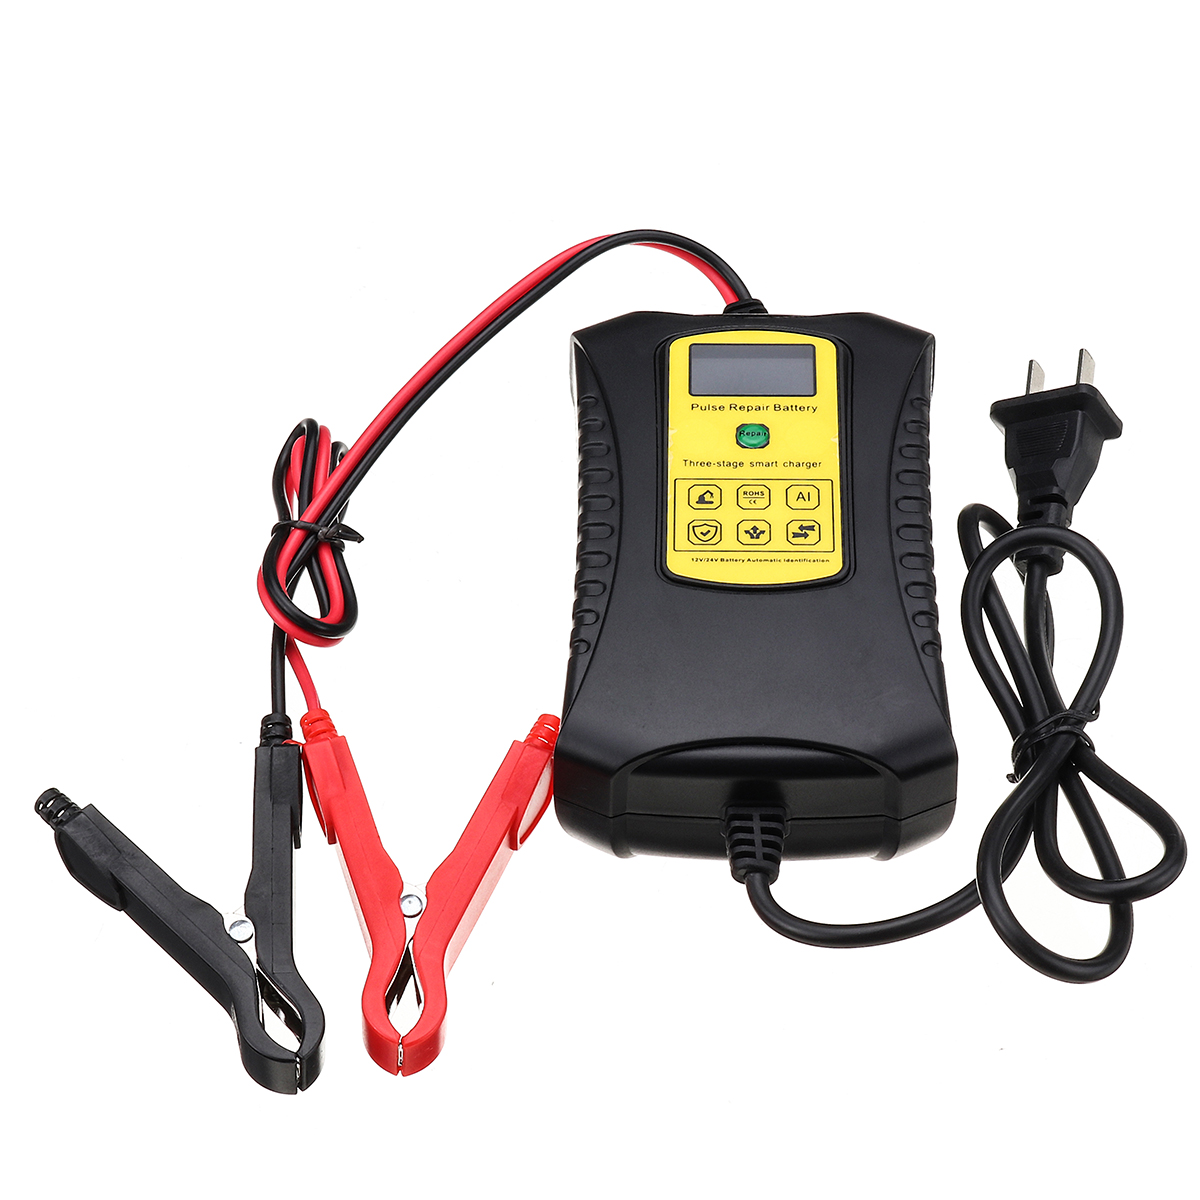 12V/24V 10-100AH 60W Pulse Repair Lead-Acid Battery Three-Stage Smart Charger